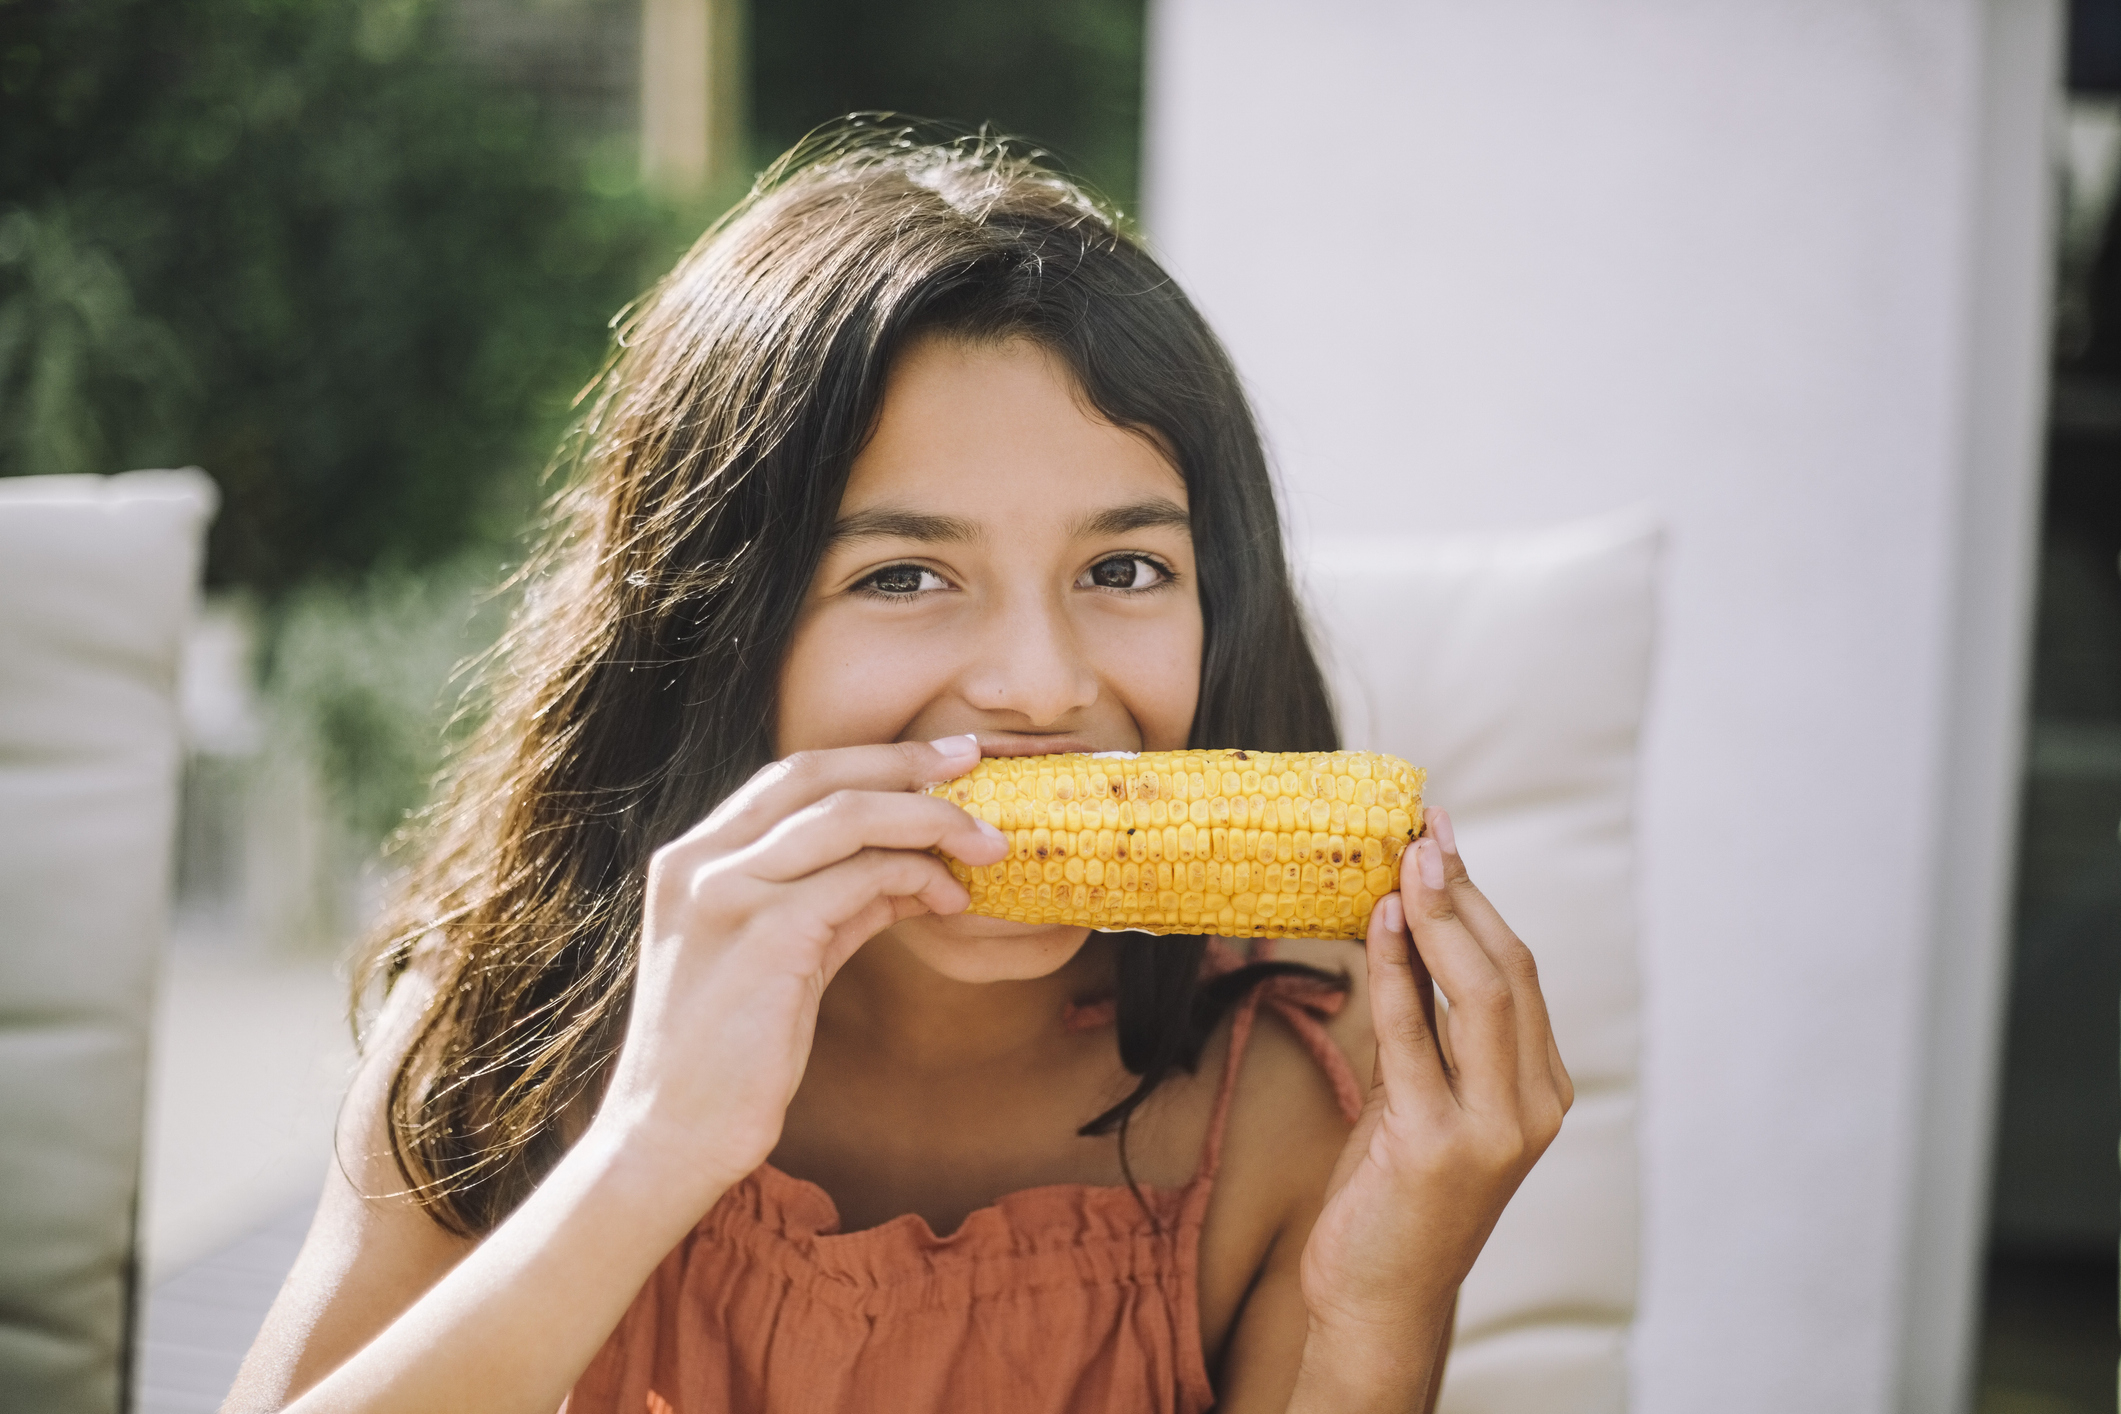 A young girl eating corn on the cob outdoors